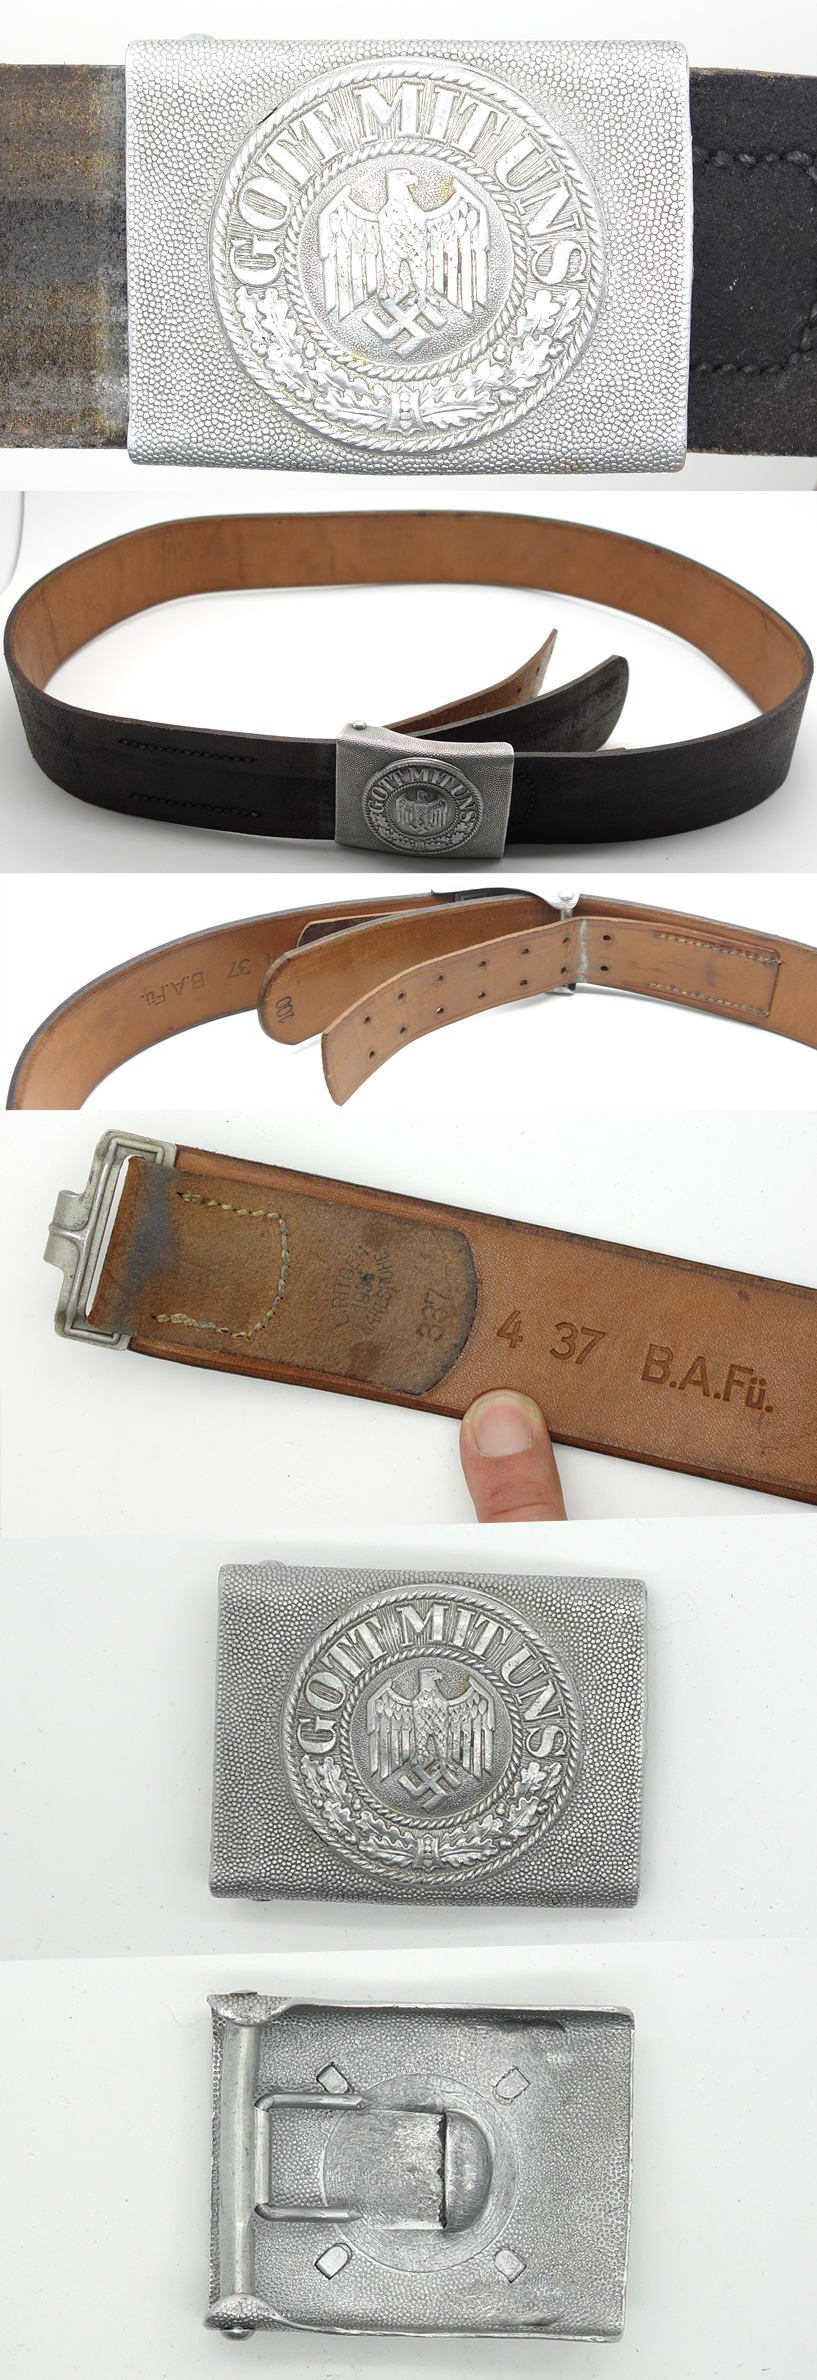 Army Dress Belt and Buckle